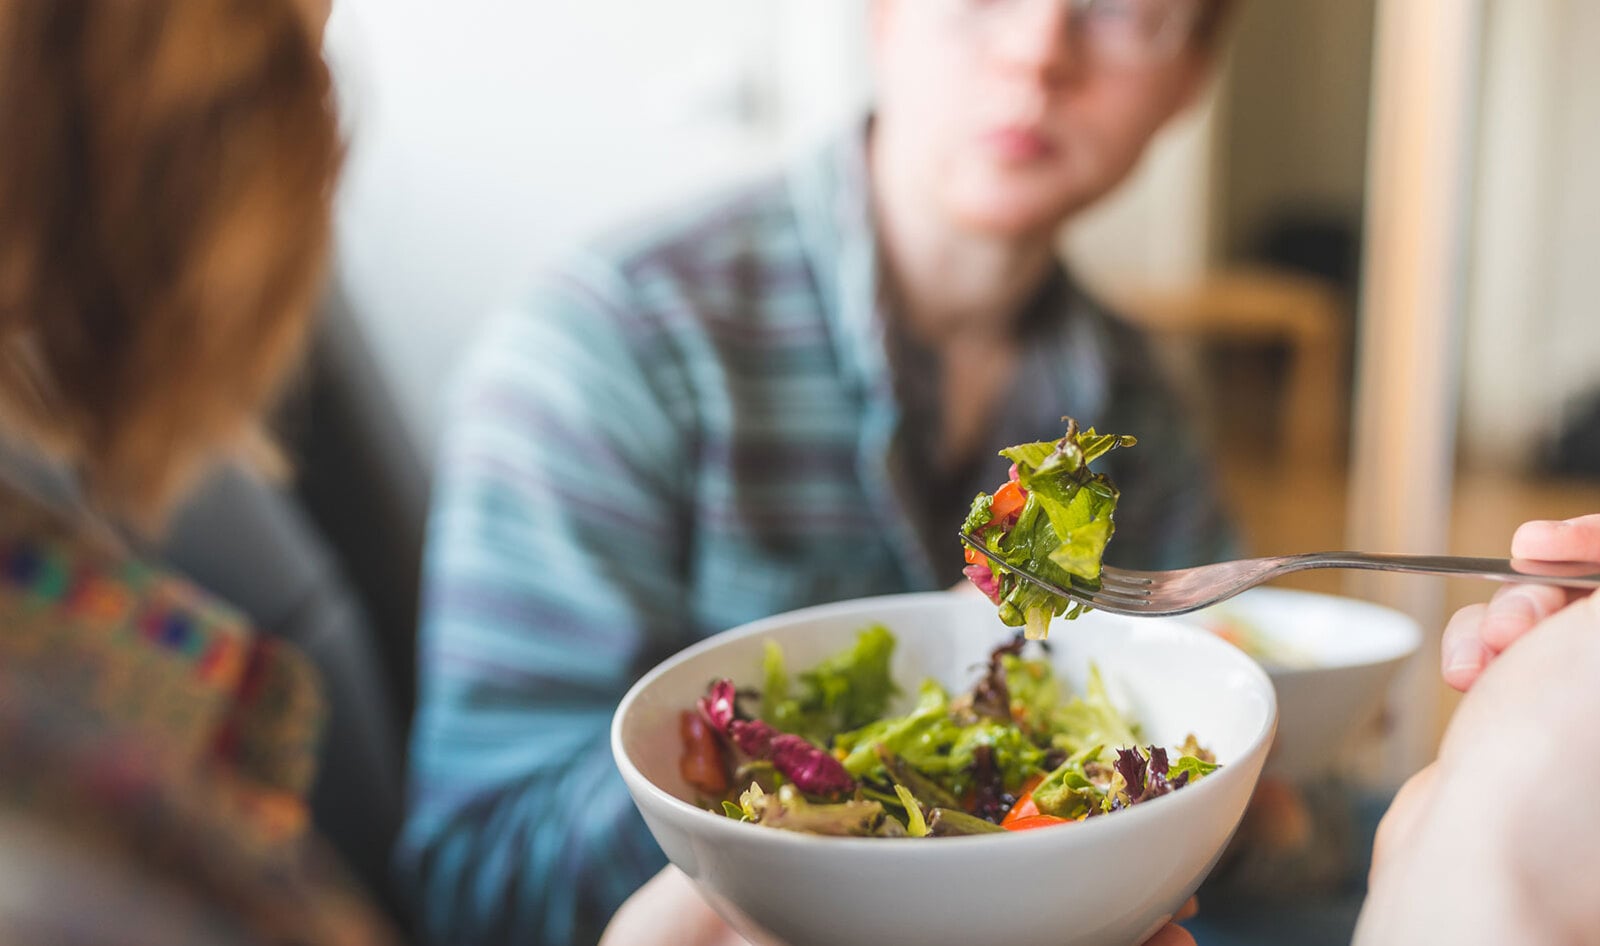 47 Percent of Vegans Do It Because Modern Food Is a Health Nightmare